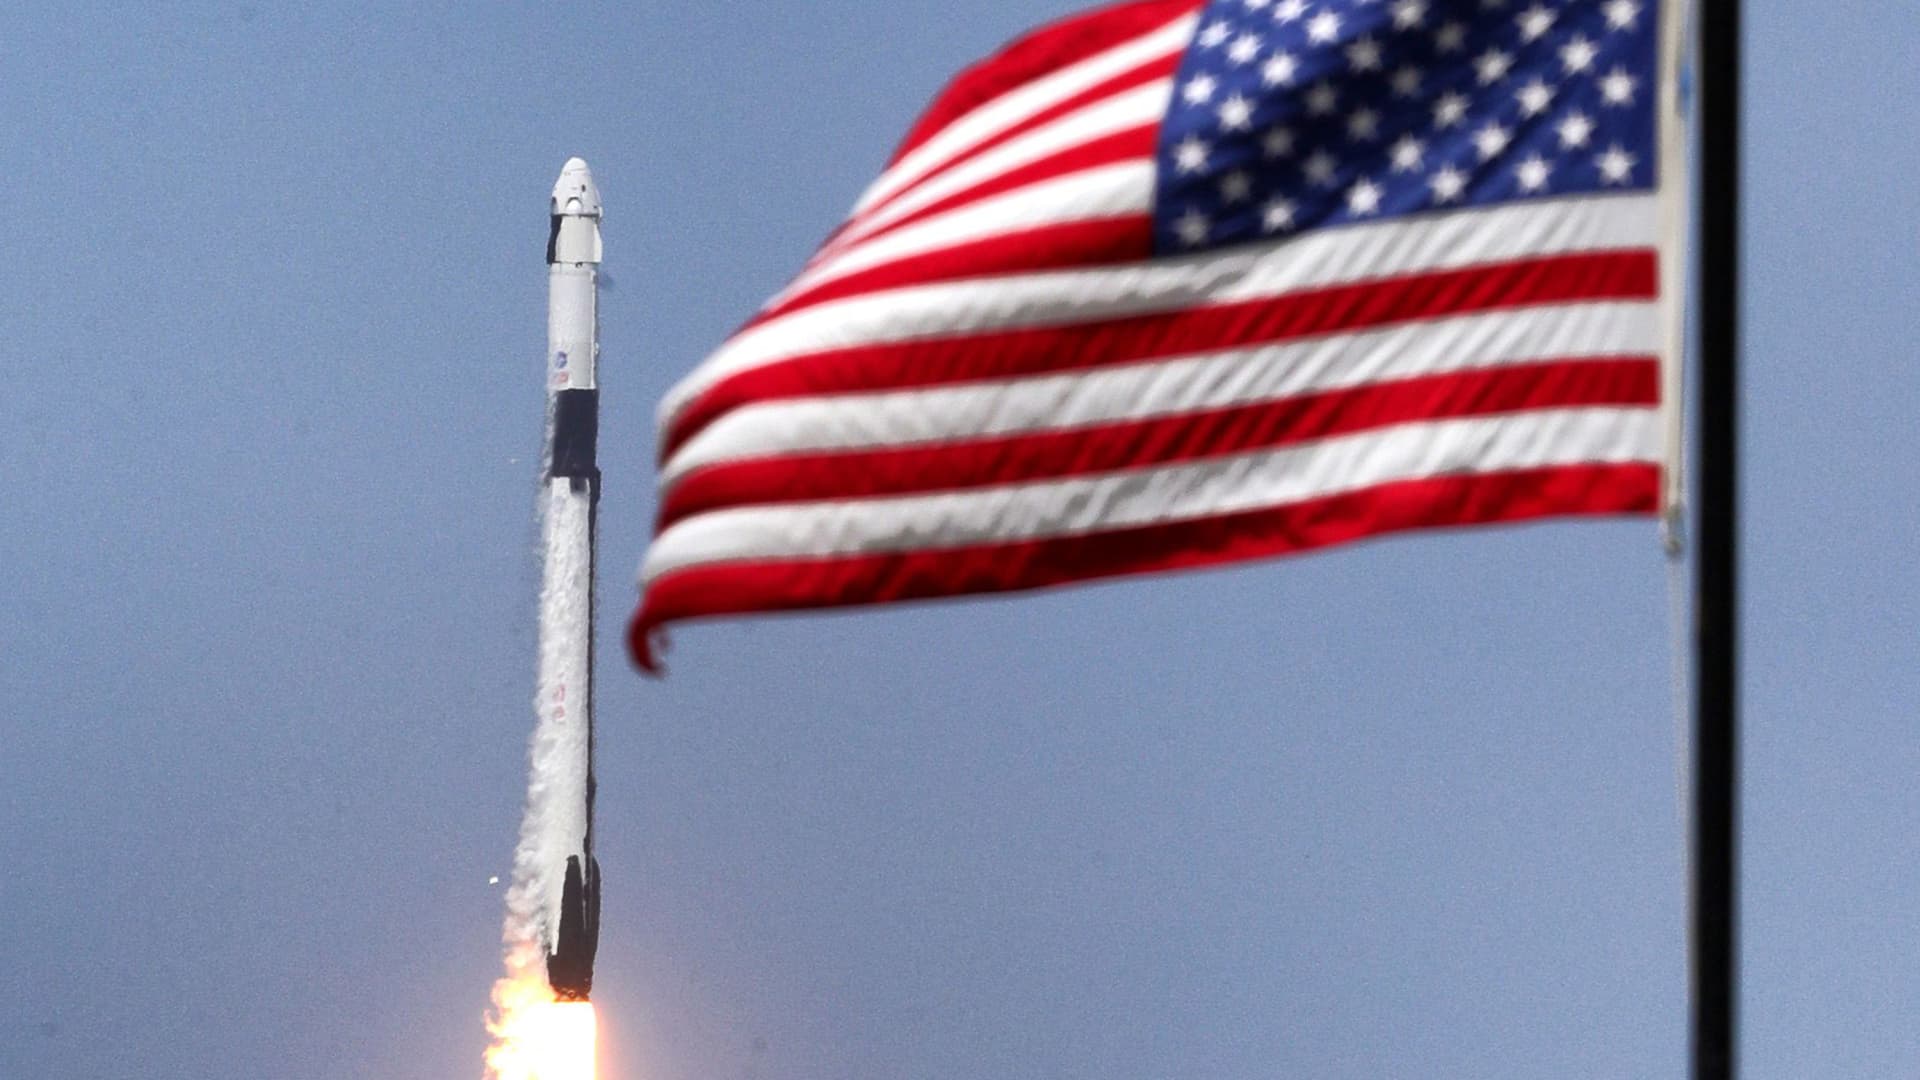 The SpaceX Falcon 9 rocket, carrying astronauts Doug Hurley and Bob Behnken in the Crew Dragon capsule, lifts off from Kennedy Space Center, Fla., on Saturday, May 30, 2020. The SpaceX Demo-2 mission is the first crewed launch of an orbital spaceflight from the U.S. in nearly a decade.